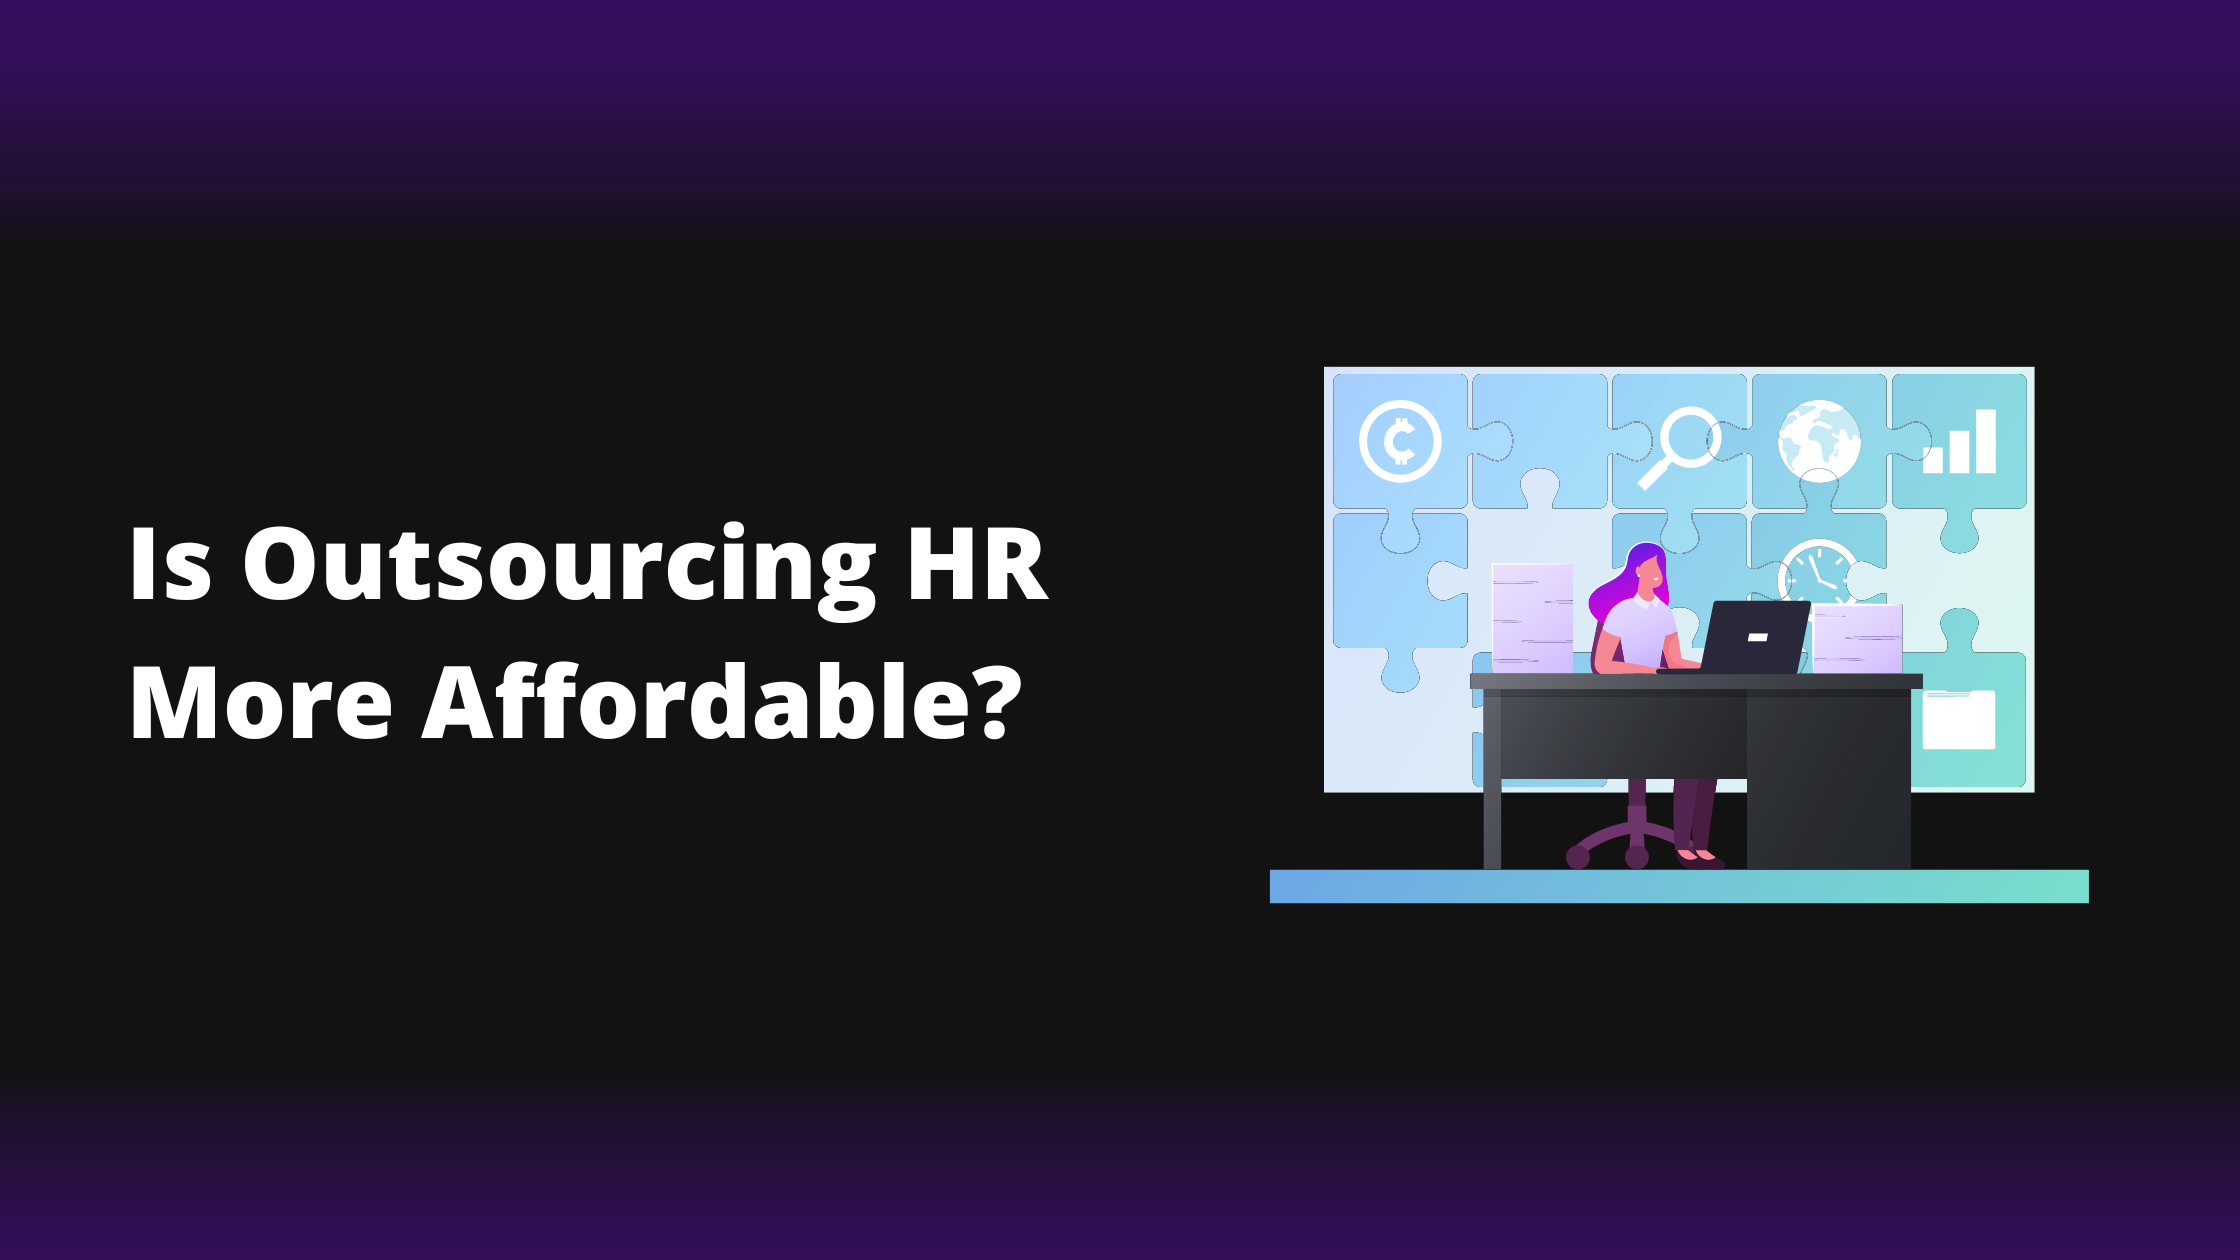  Is Outsourcing HR More Affordable?